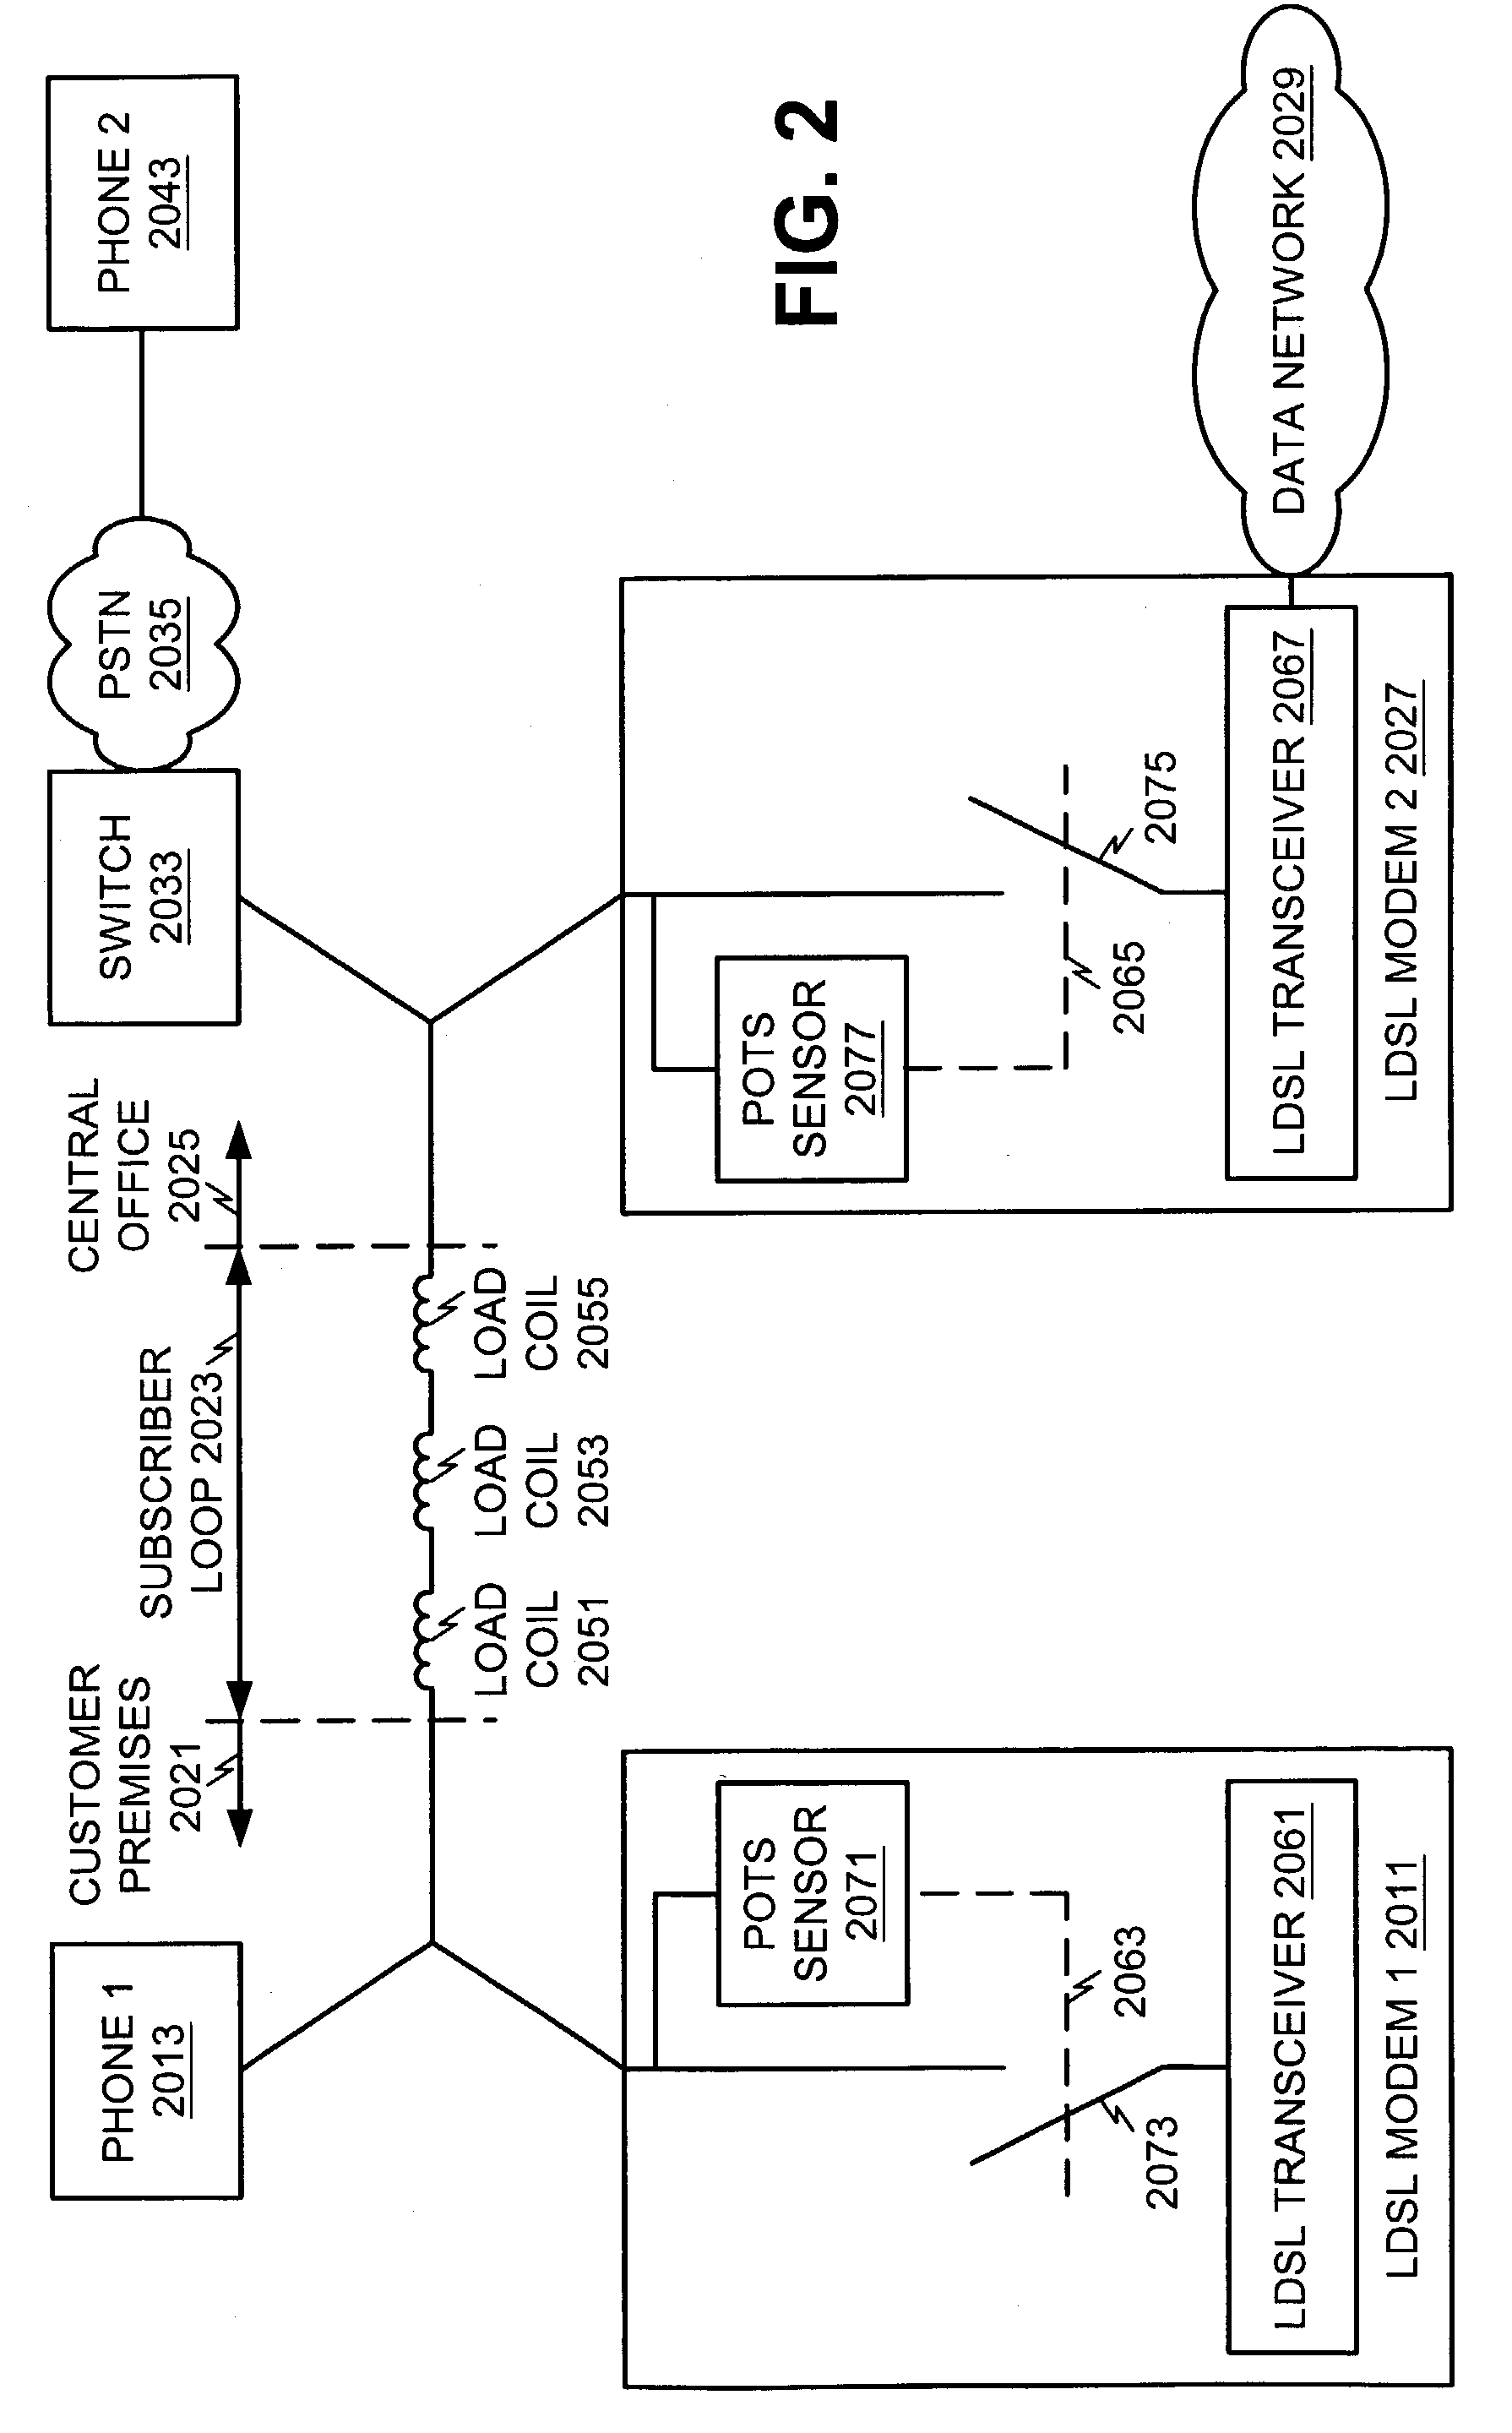 Automatic rapid switching between DSL service and POTS over loaded loops